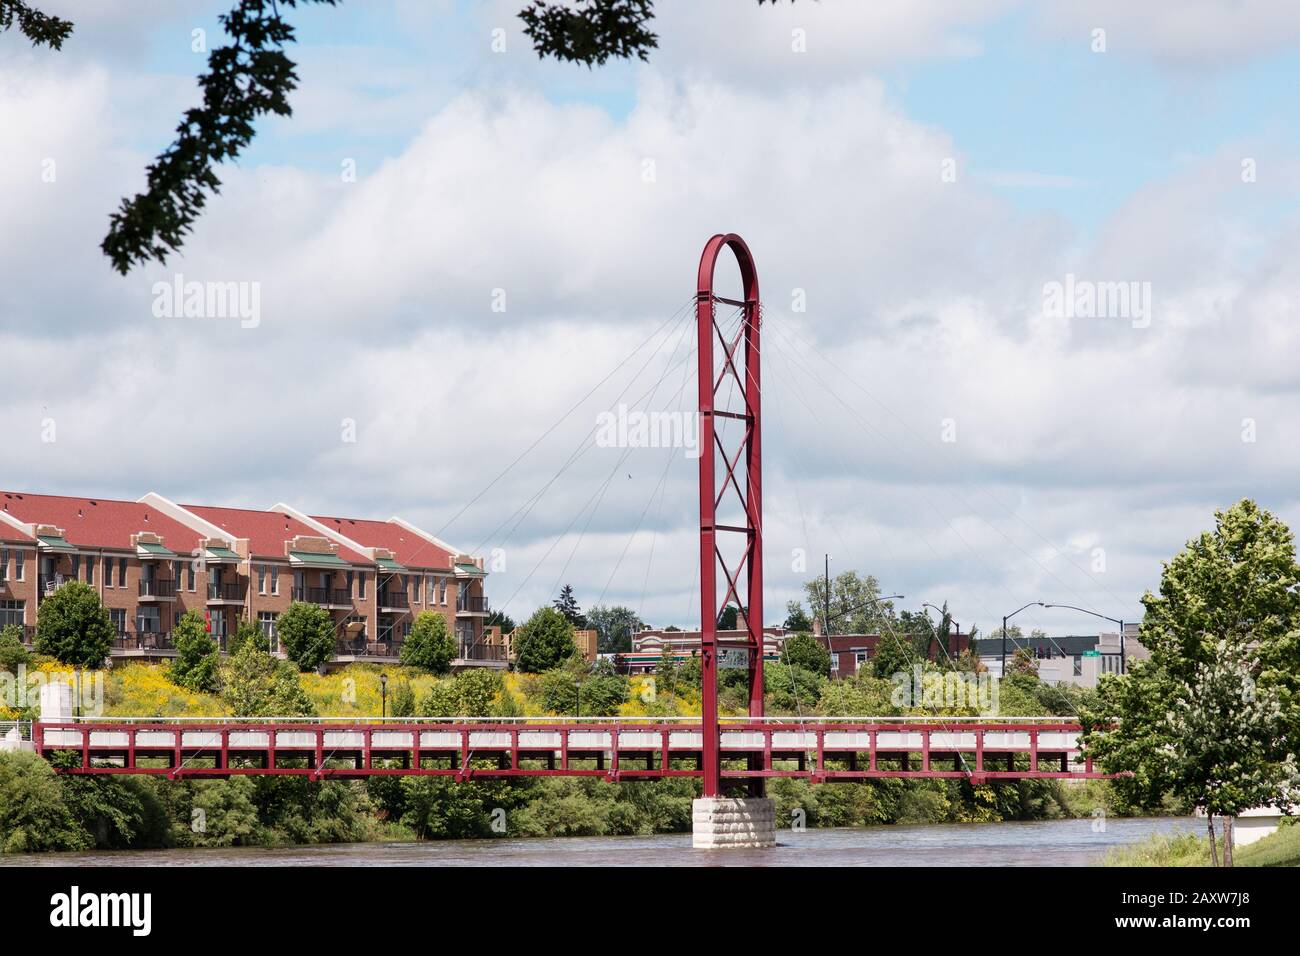 The cable stayed bridge at the Riverwalk connects Beutter and Battell Parks over the St. Joseph River in Mishawaka, Indiana, USA. Stock Photo